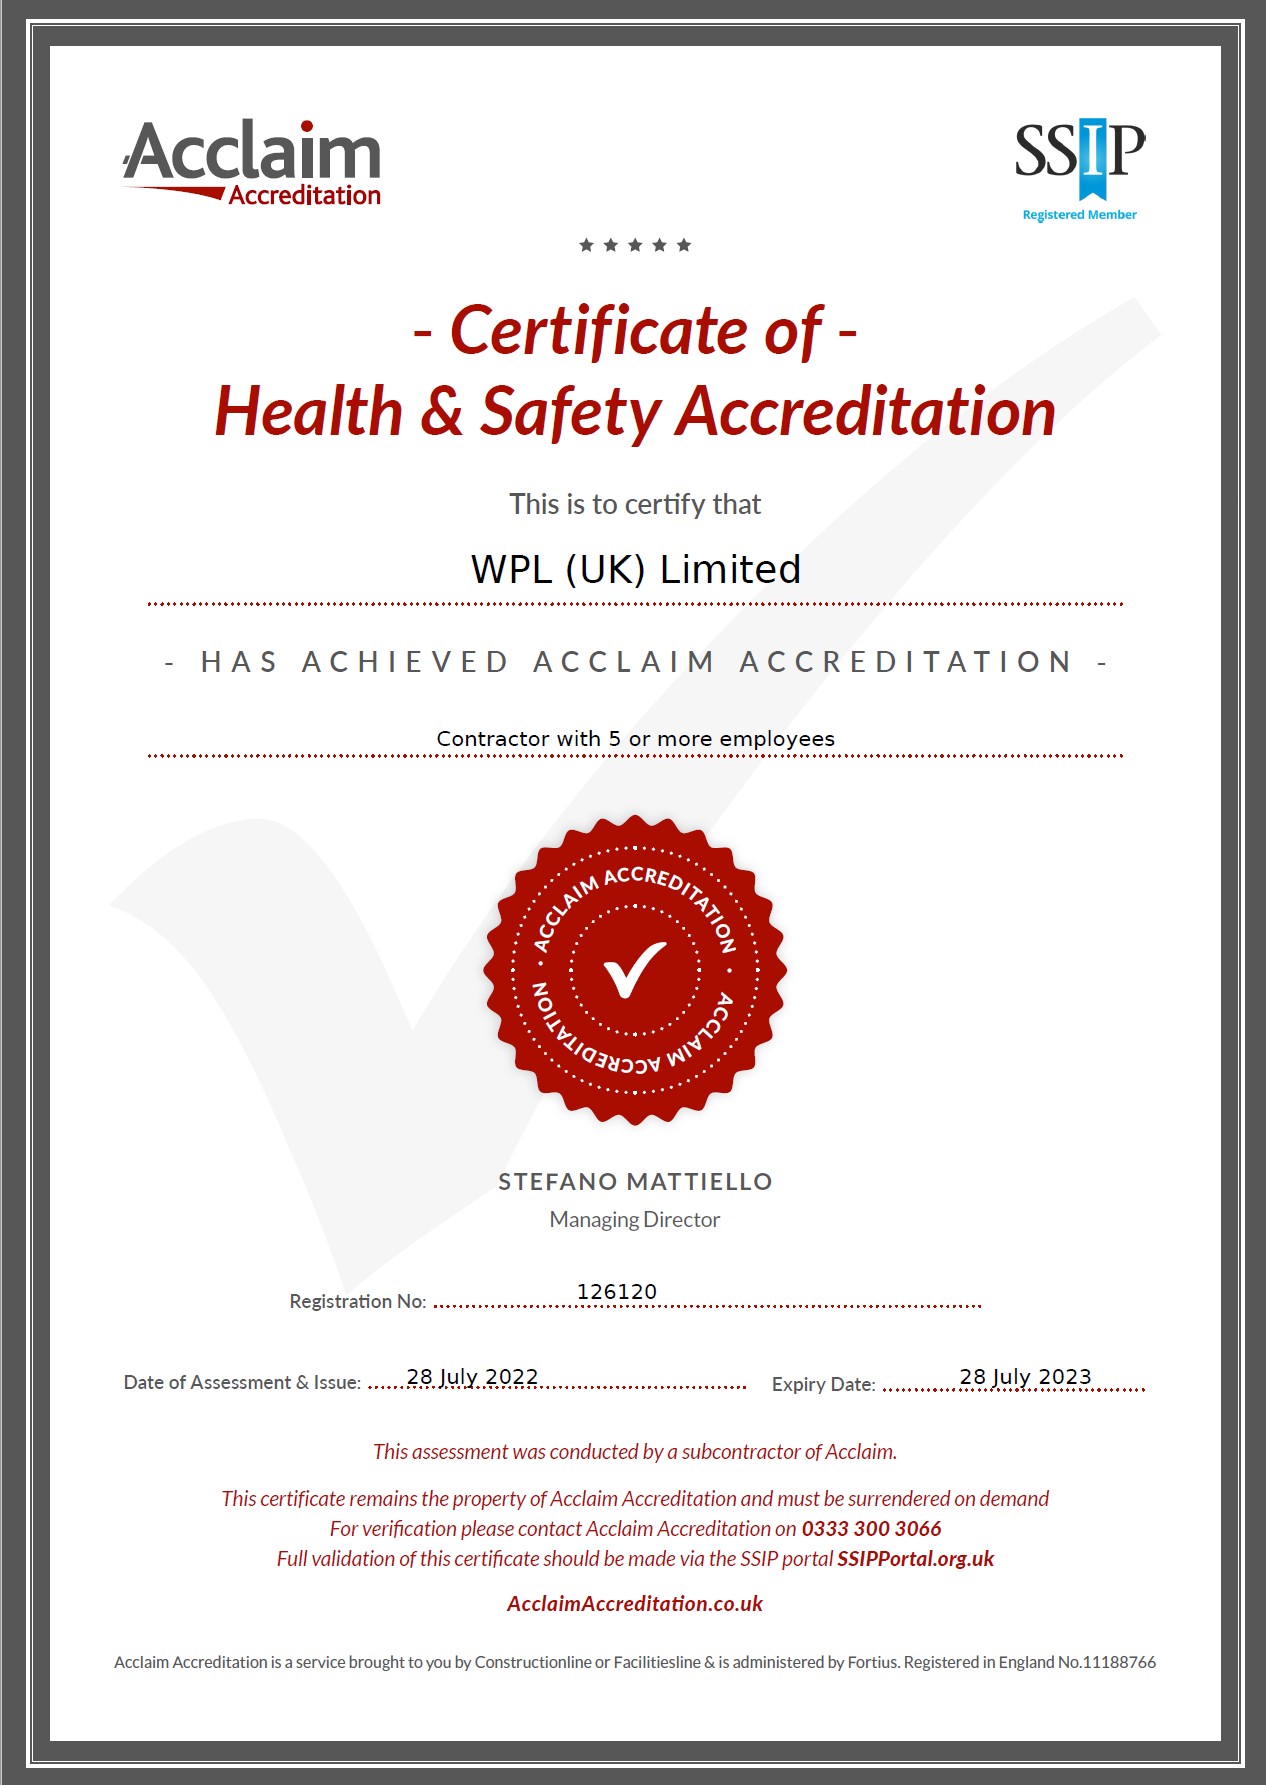 WPLUK SSIP Acclaim Accreditation 28th July 2023